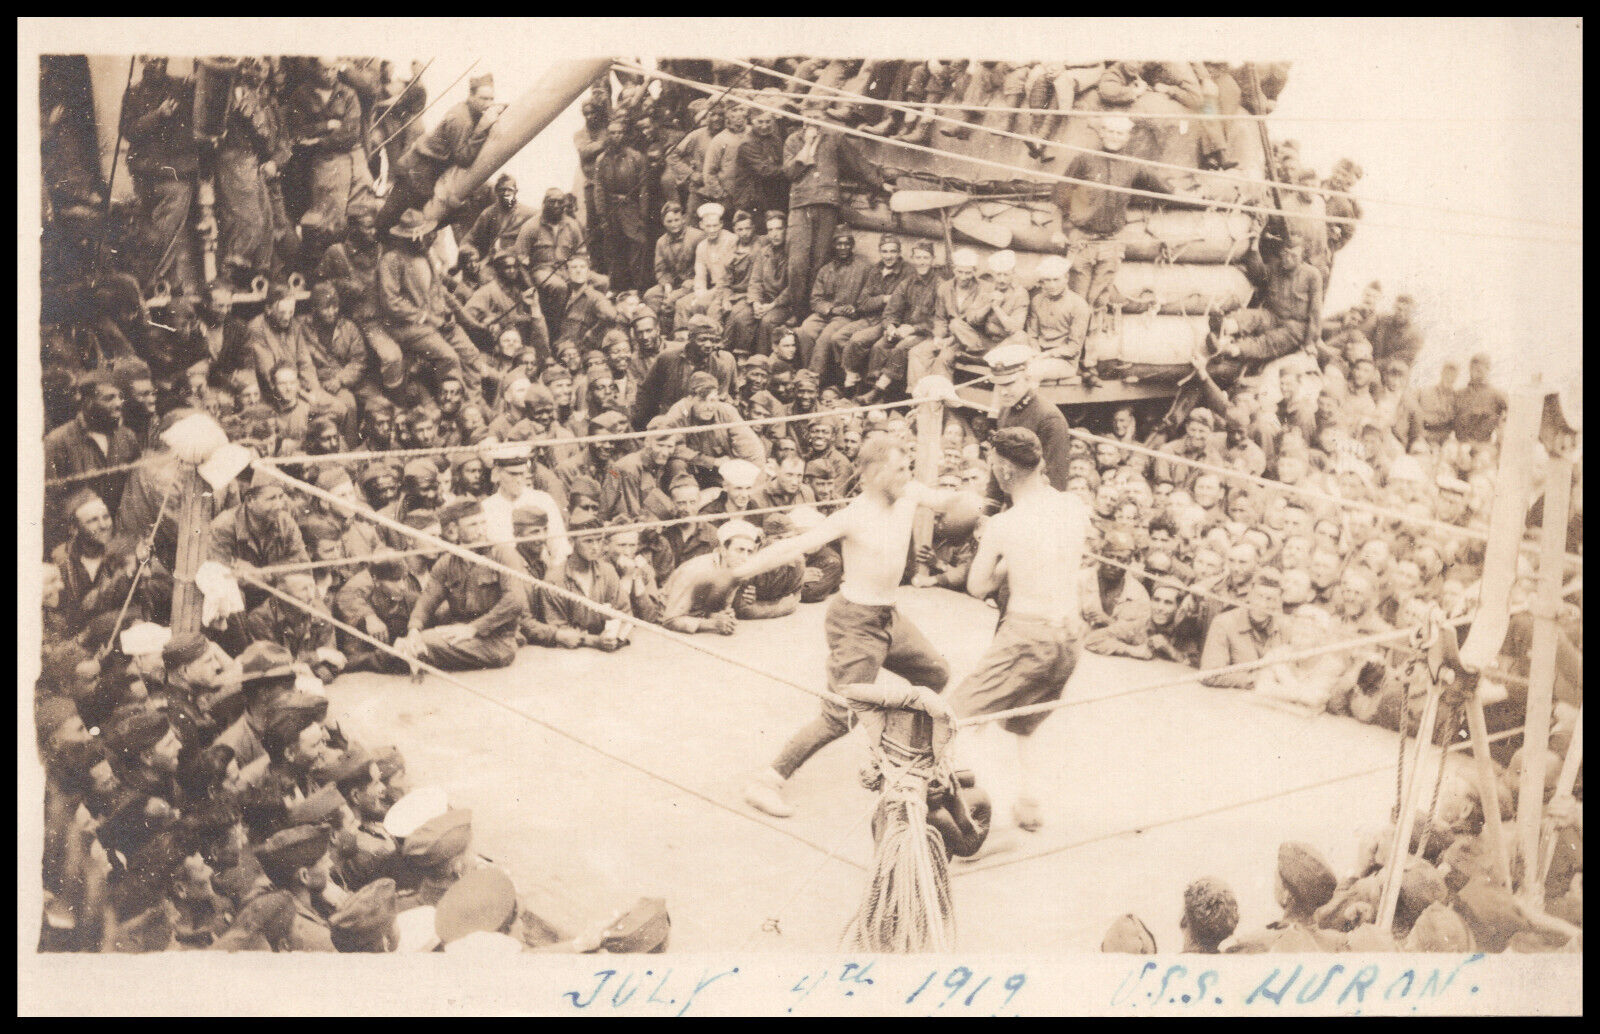 INTEGRATED US NAVY Troops, USS Huron ID-1408, Boxing, 4 July 1919, Postcard RPPC